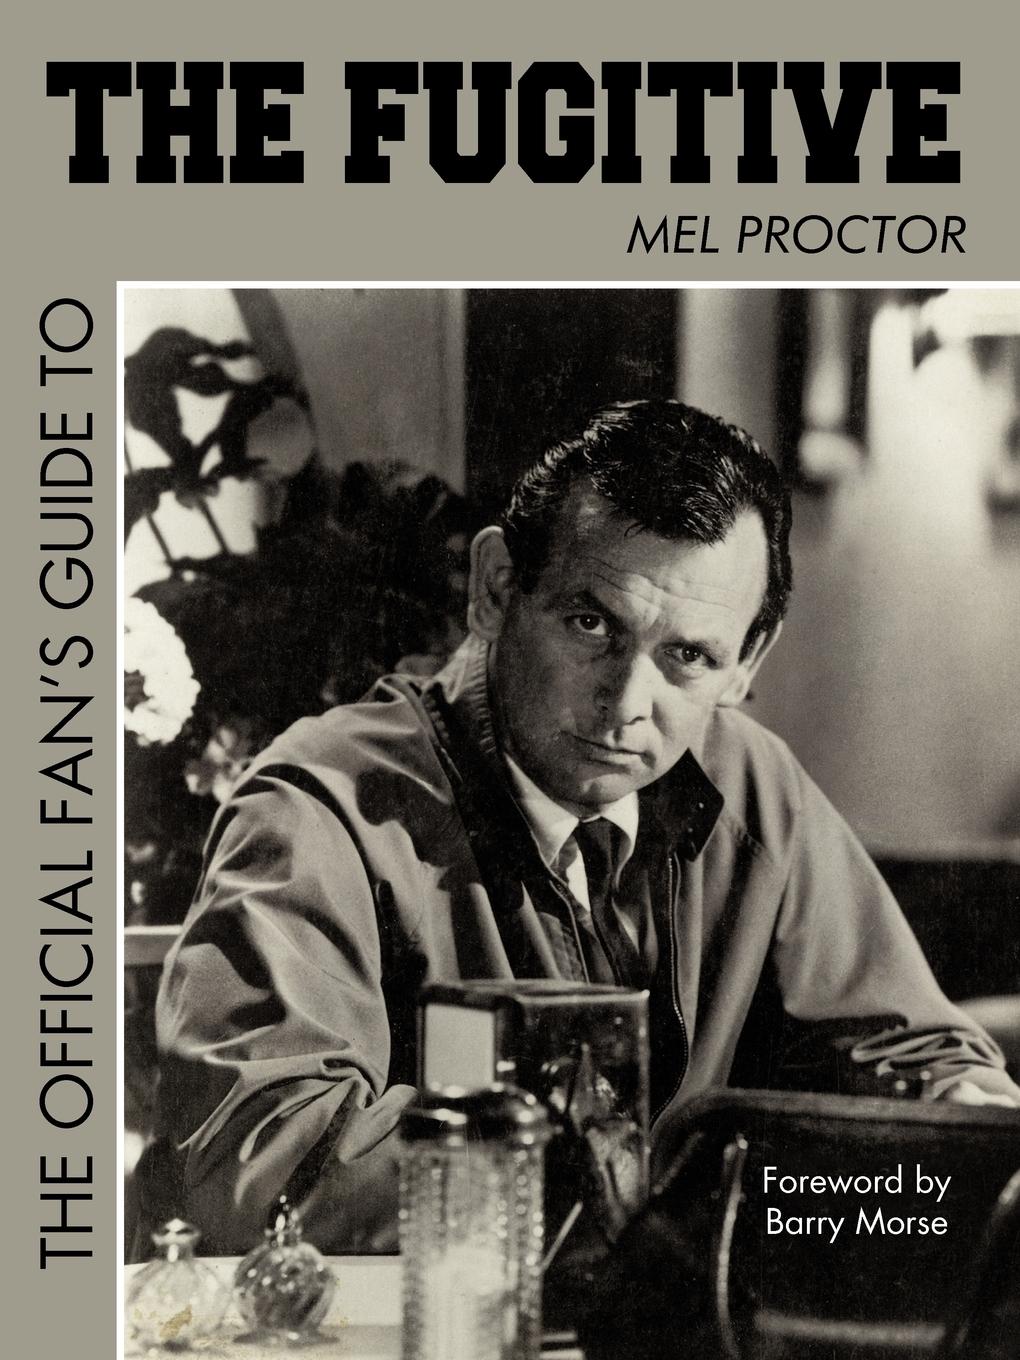 The Official Fan s Guide to the Fugitive the Official Fan s Guide to the Fugitive - Mel Proctor, Proctor Mel Proctor